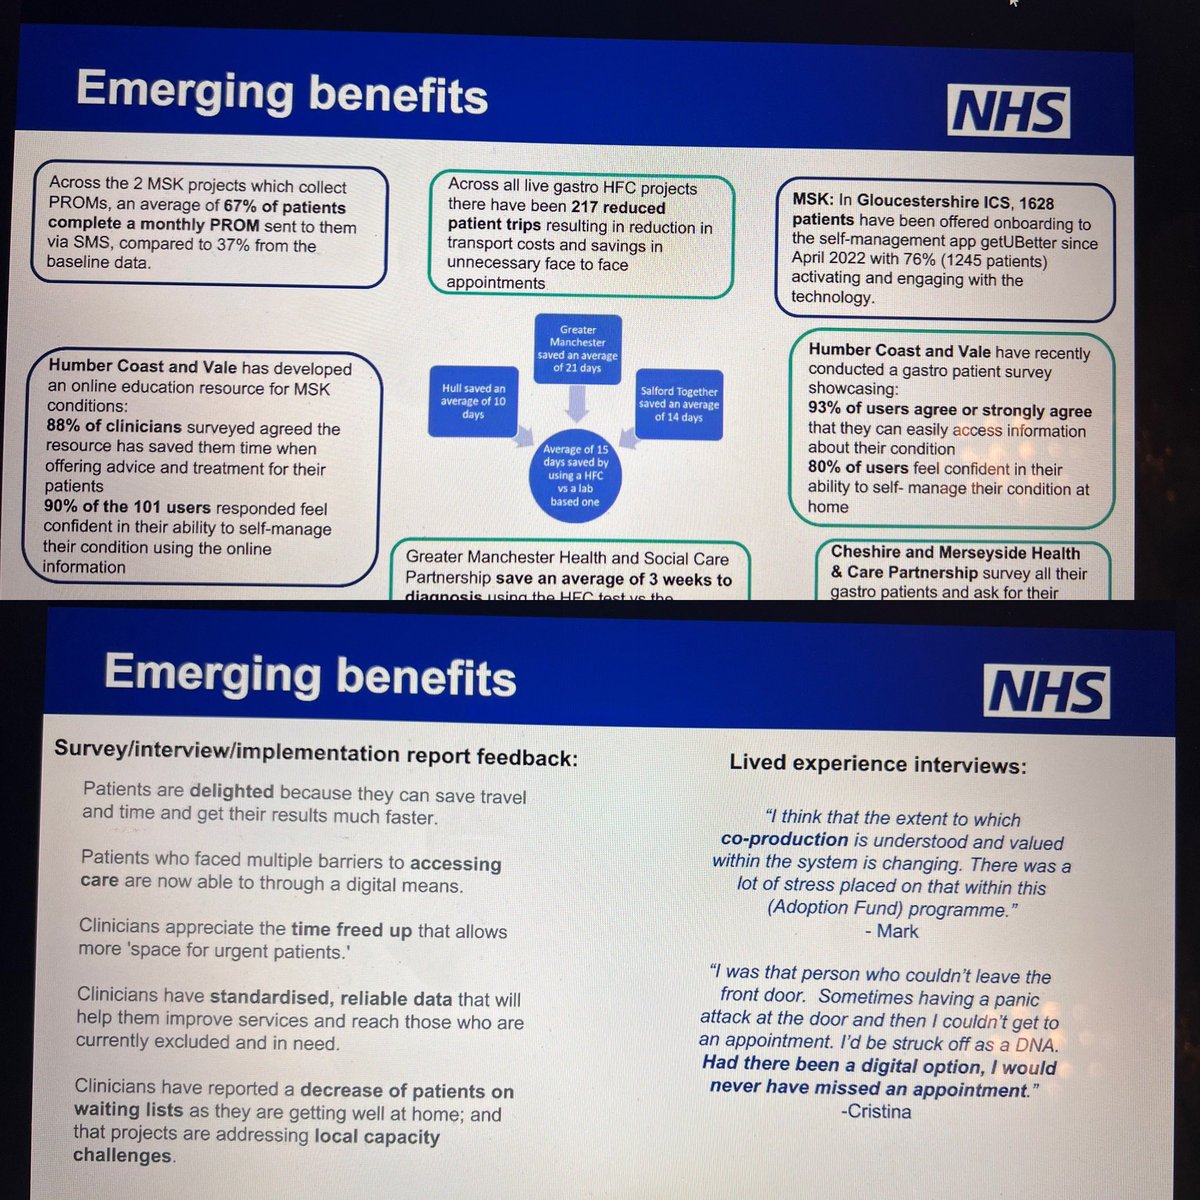 It’s still early days but some great examples here of emerging benefits from use of technology in gastro and MSK pathways. Thanks to everyone who has worked on the programme at national, regional and local level! #NHSInnovCollab